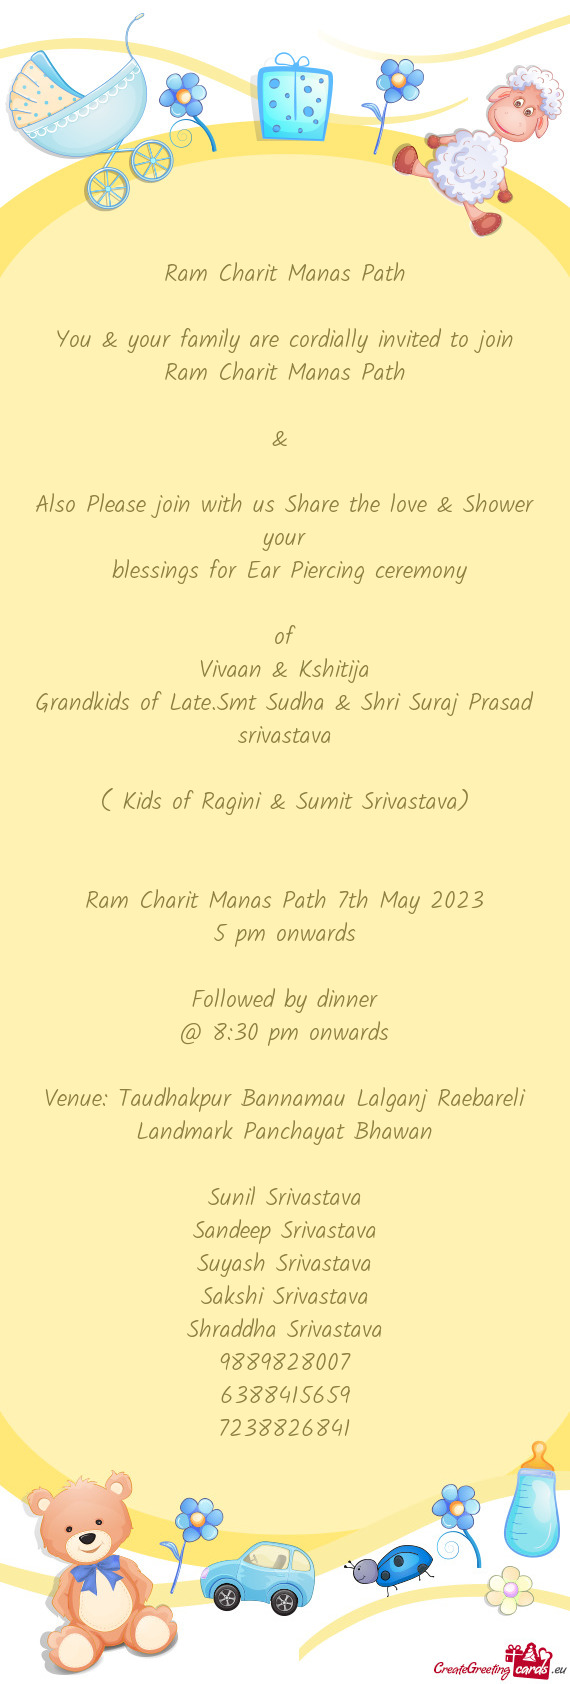 You & your family are cordially invited to join Ram Charit Manas Path